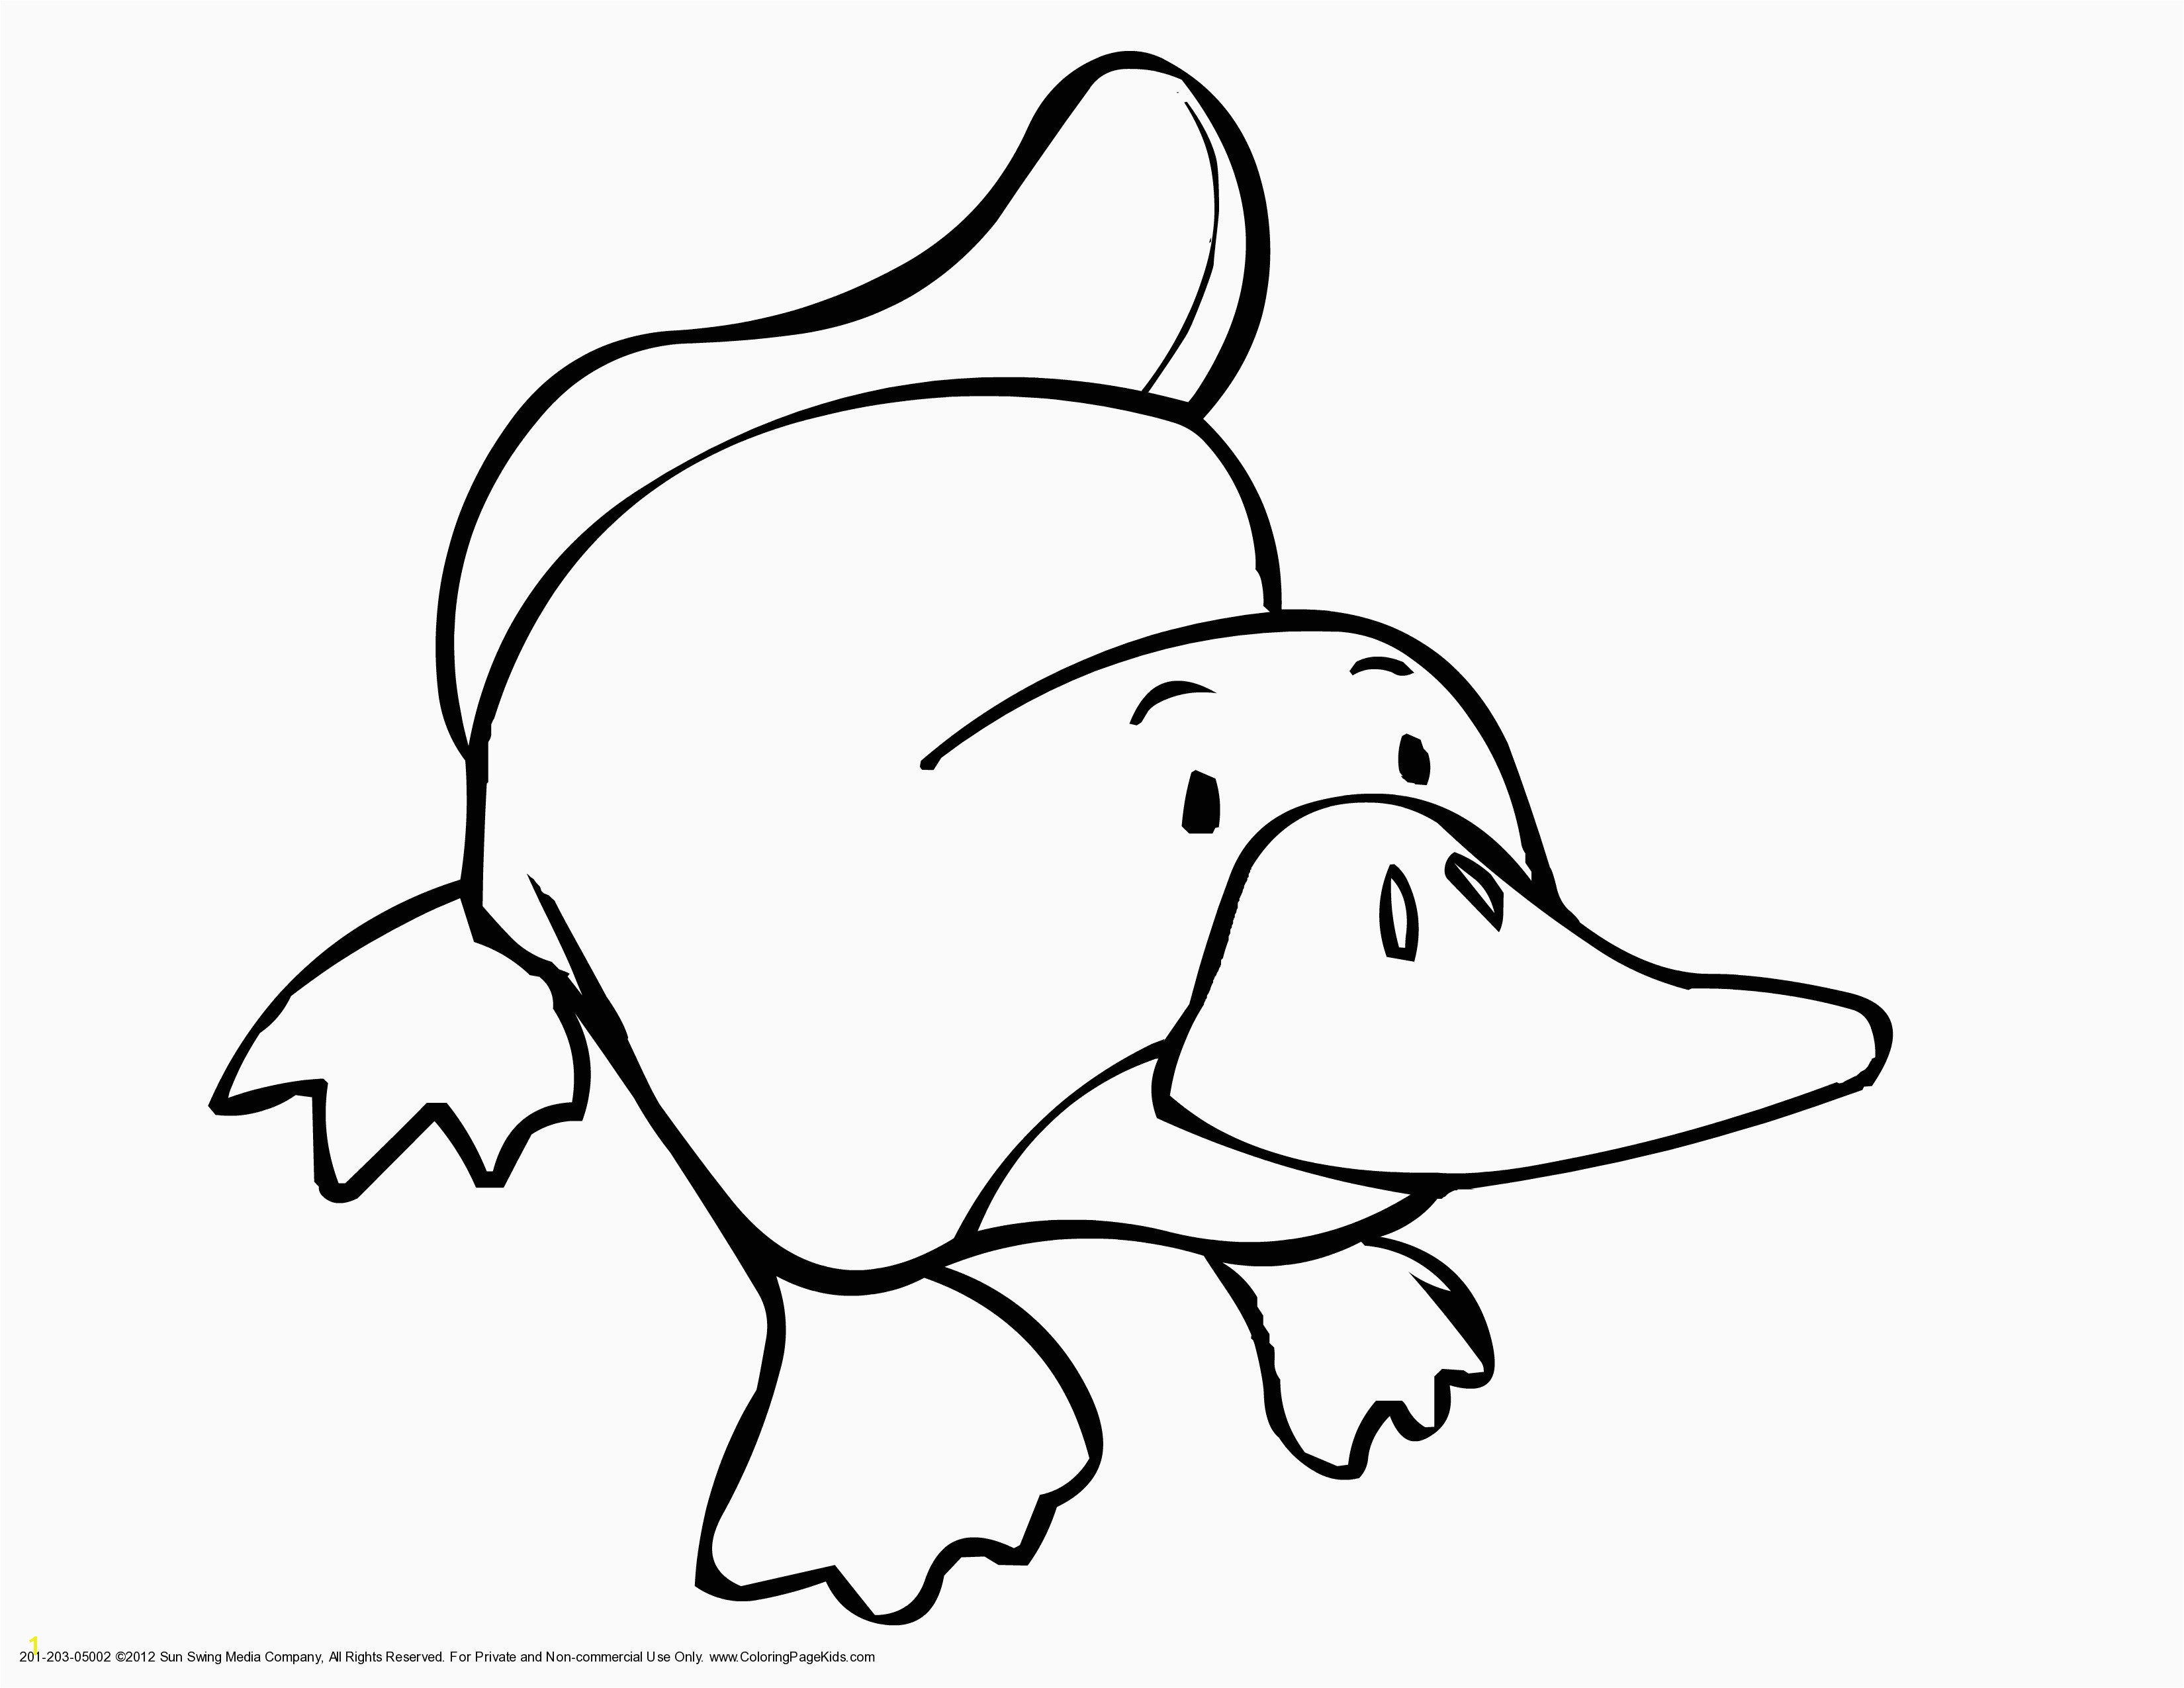 Coloring Pages Woodland Animals Fresh Animals Coloring Page Fresh I Pinimg originals 21 3d 0d